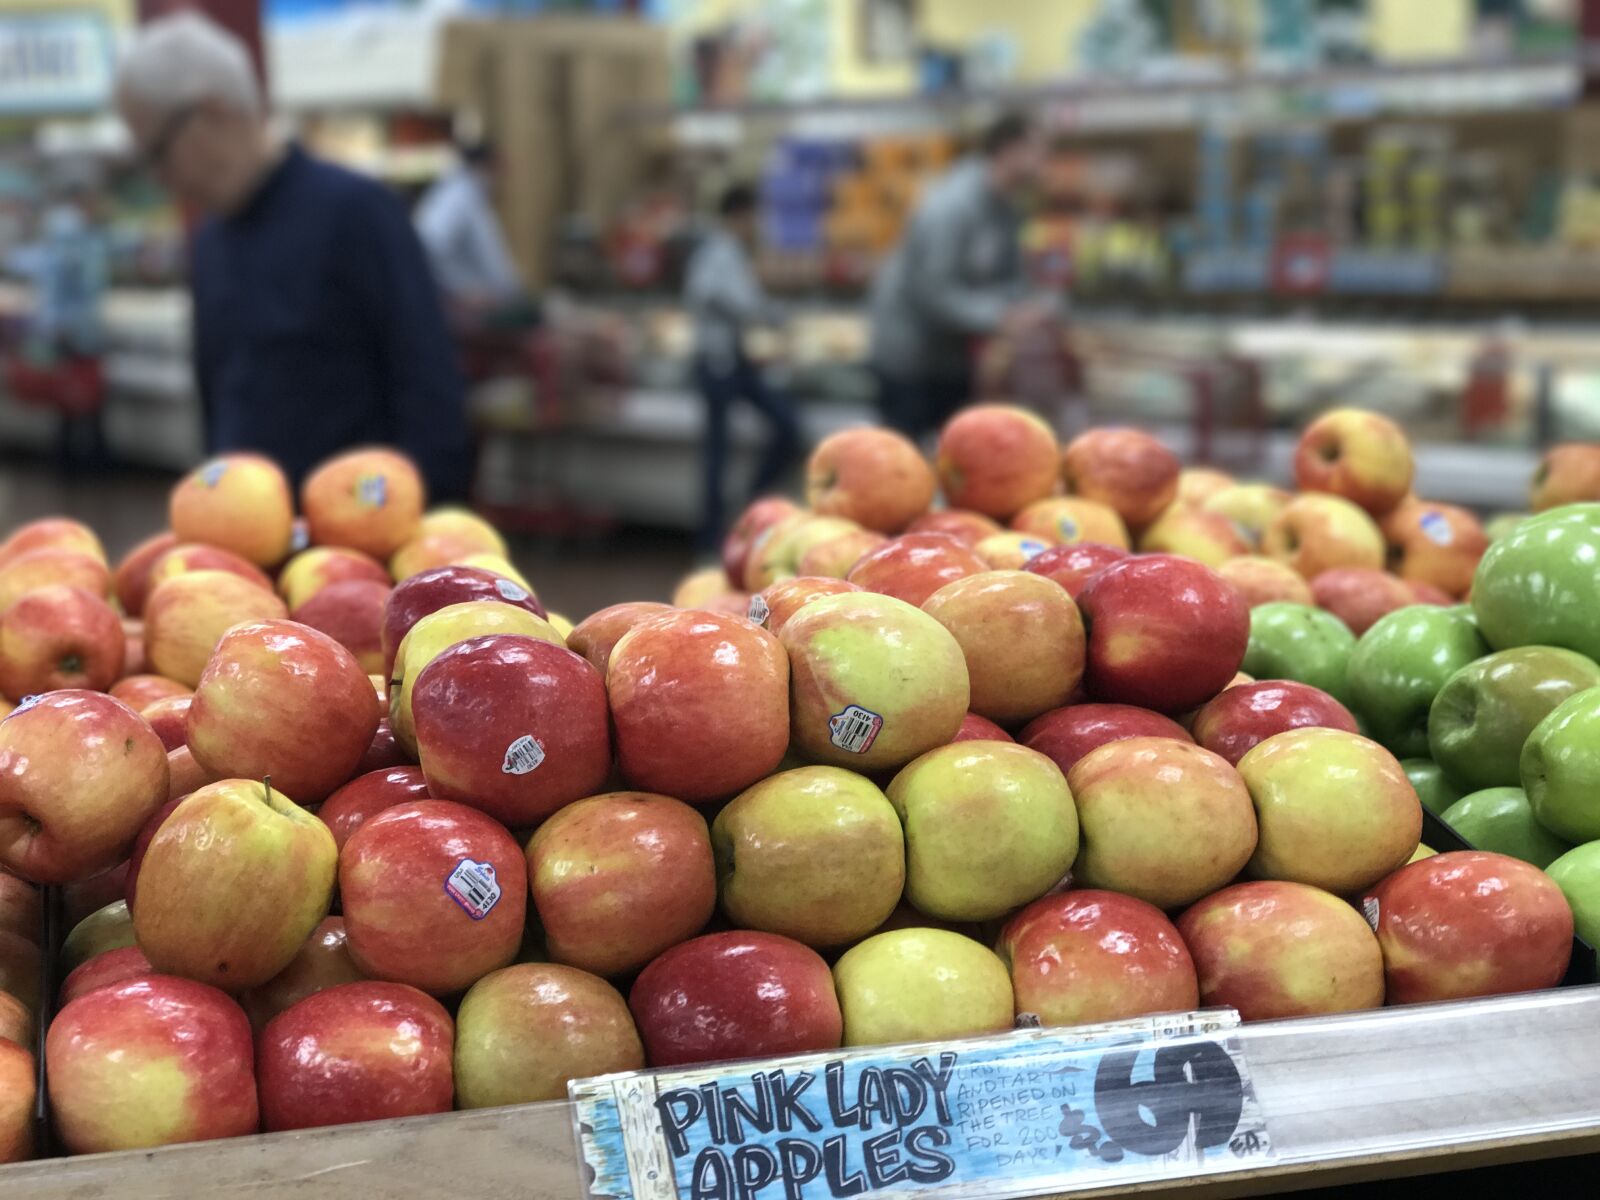 Apple iPhone 7 Plus sample photo. Apples, groceries photography